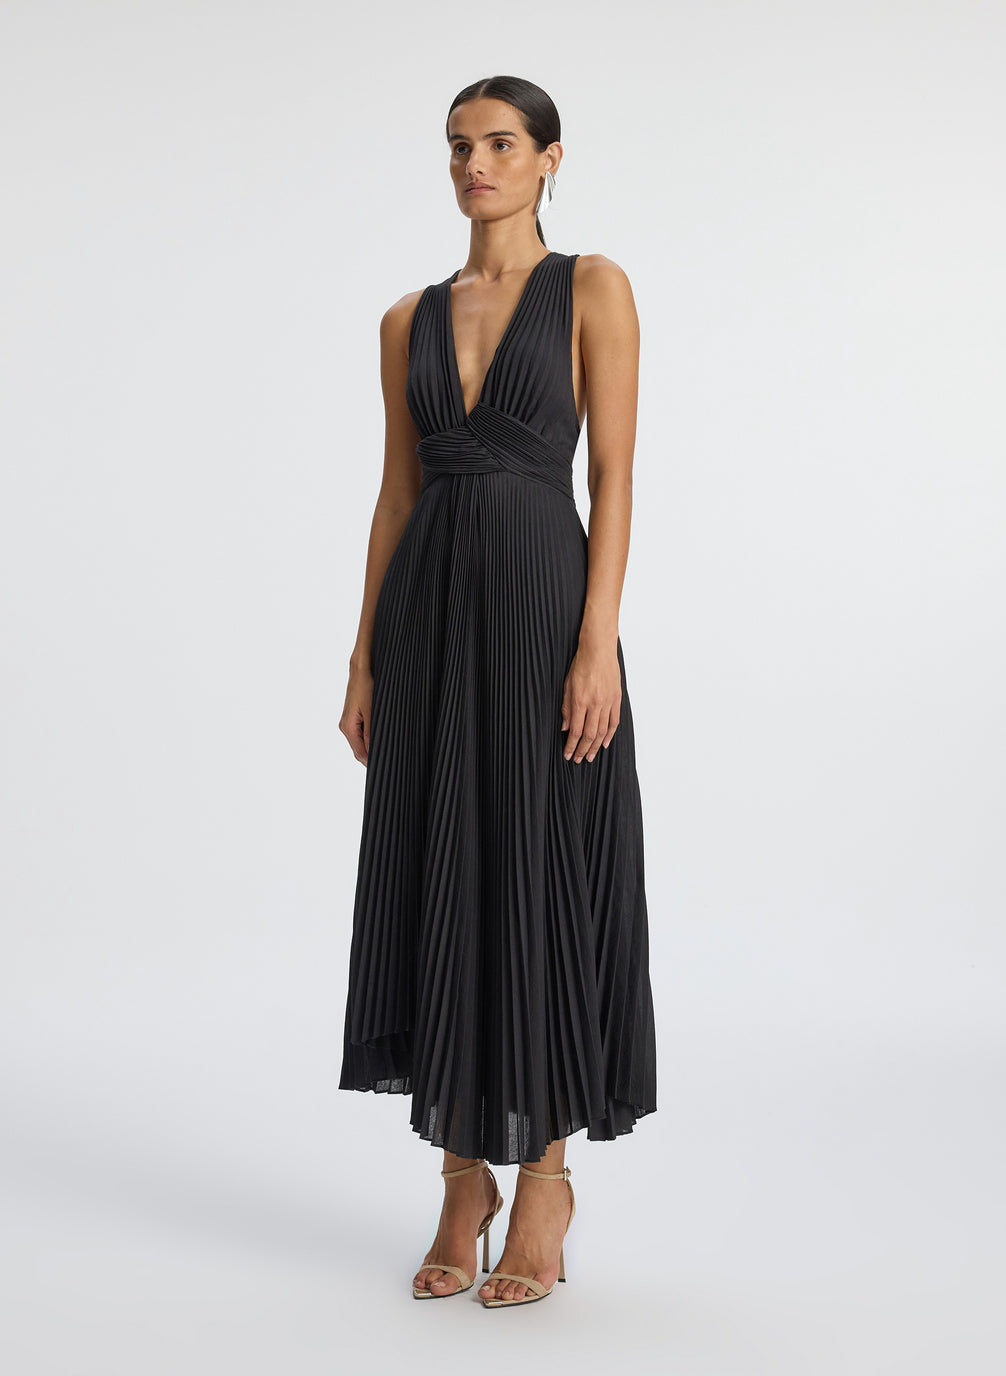 side view of woman wearing black deep v-neck pleated midi dress